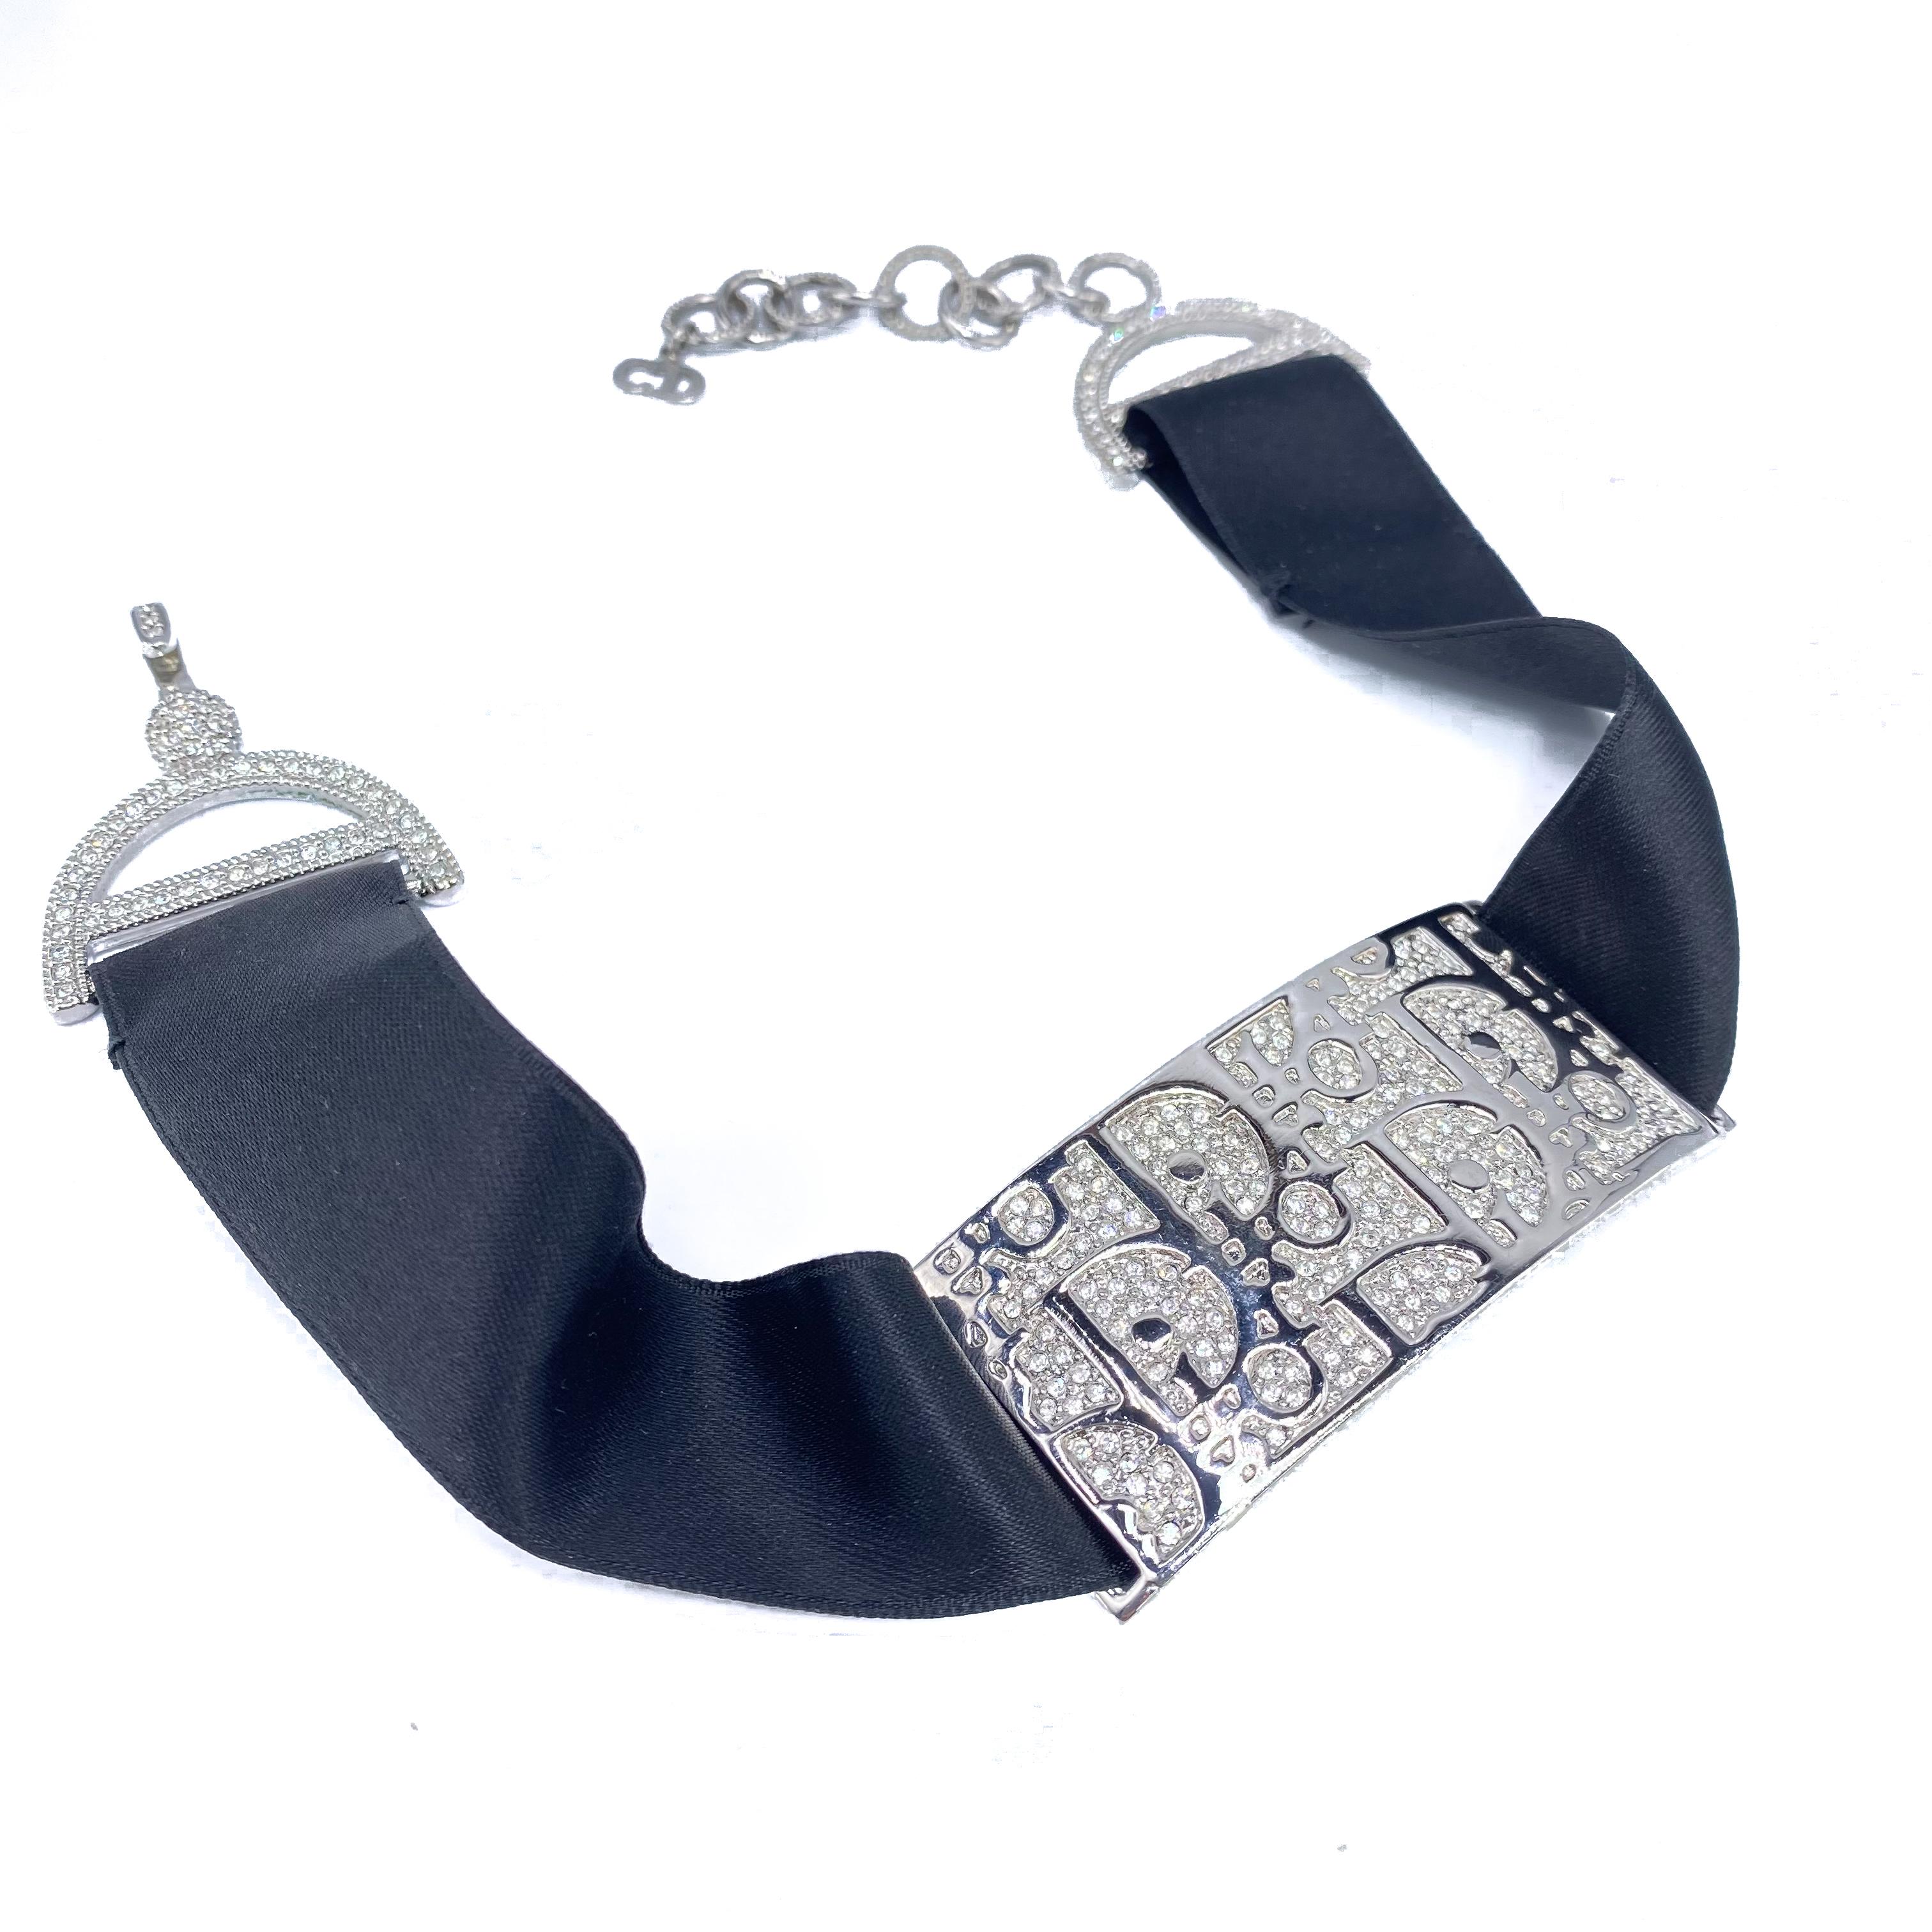 Dior Y2K Vintage Trotter Choker 

An incredible statement piece from the late 90s Dior archive

Detail
-Rectangular pendant crafted from rhodium silver metal featuring the iconic trotter logo pattern
-Black satin ribbon choker
-Rhinestone encrusted